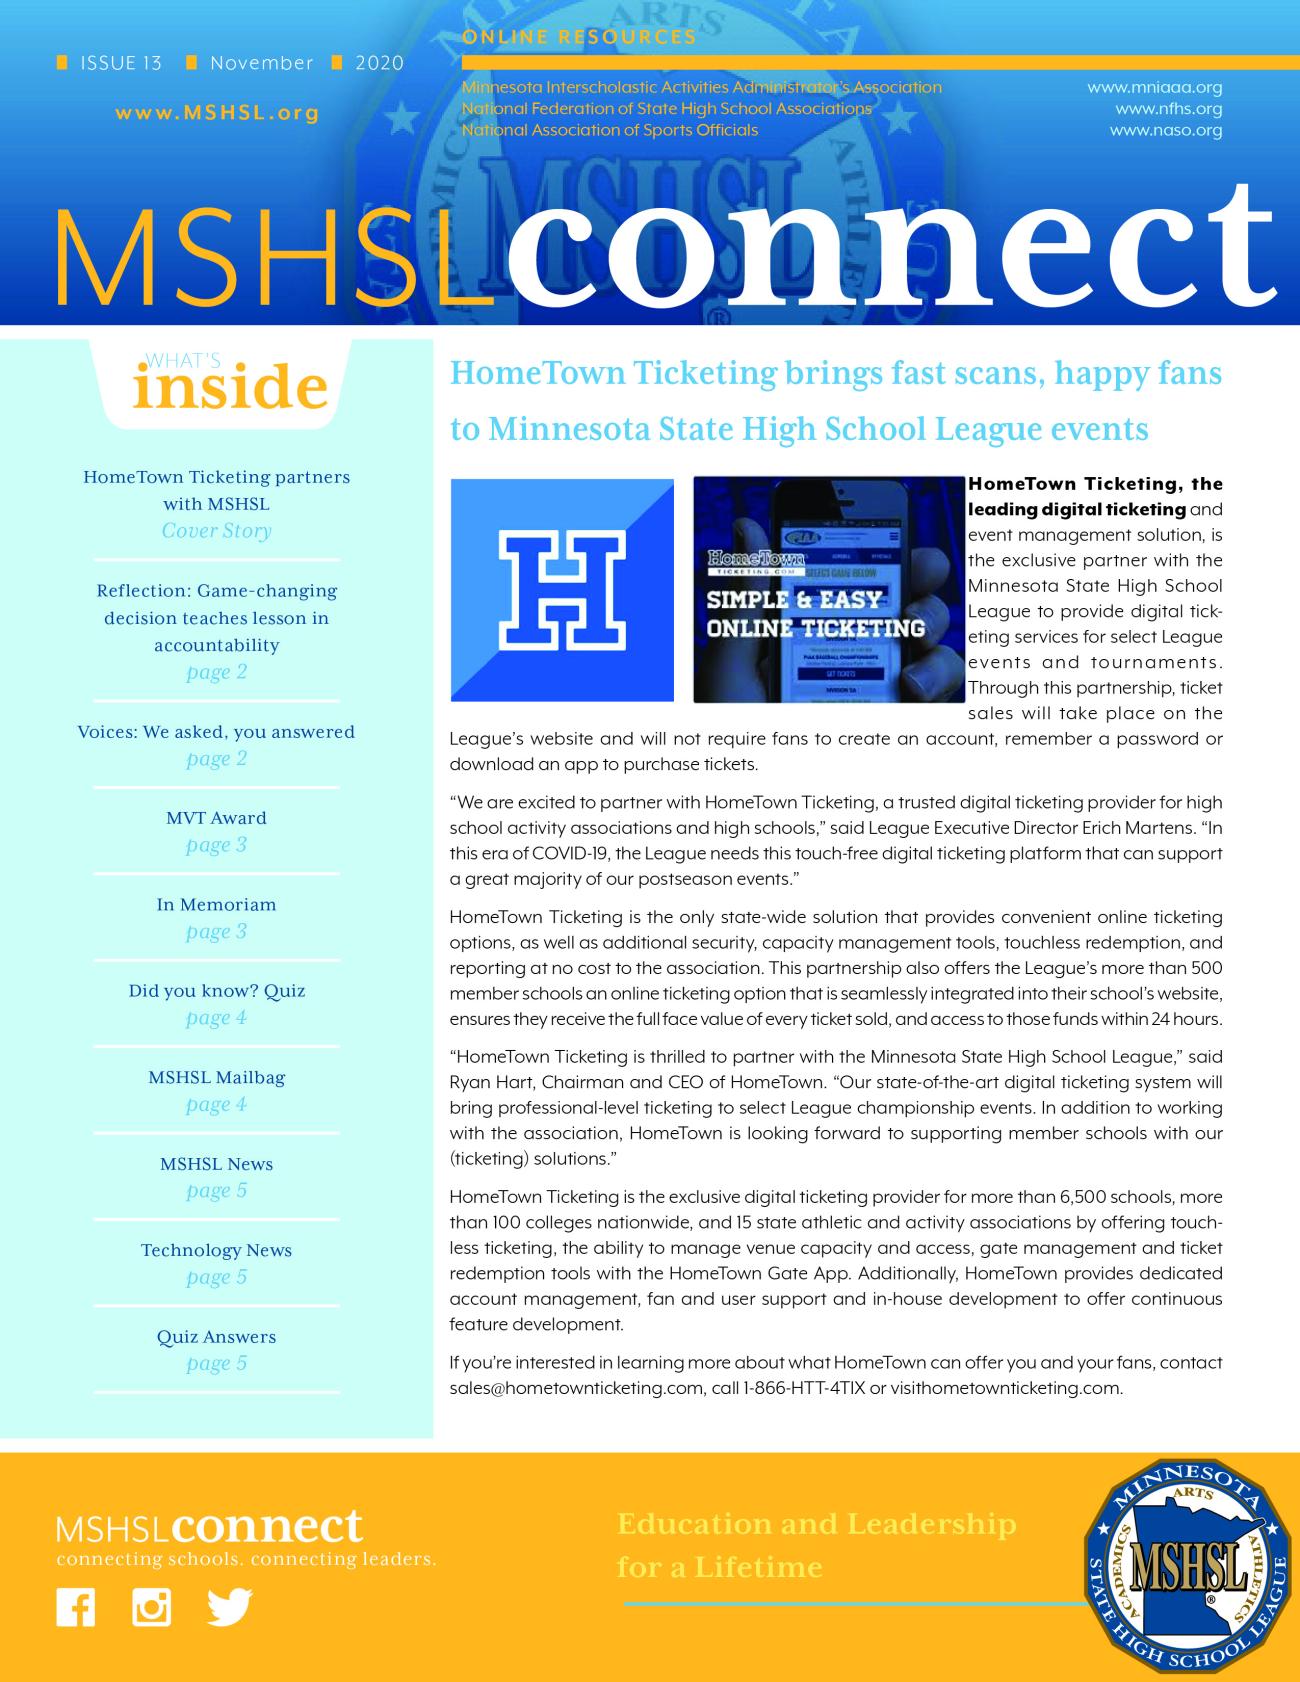 Read the latest edition of the MSHSL Connect 